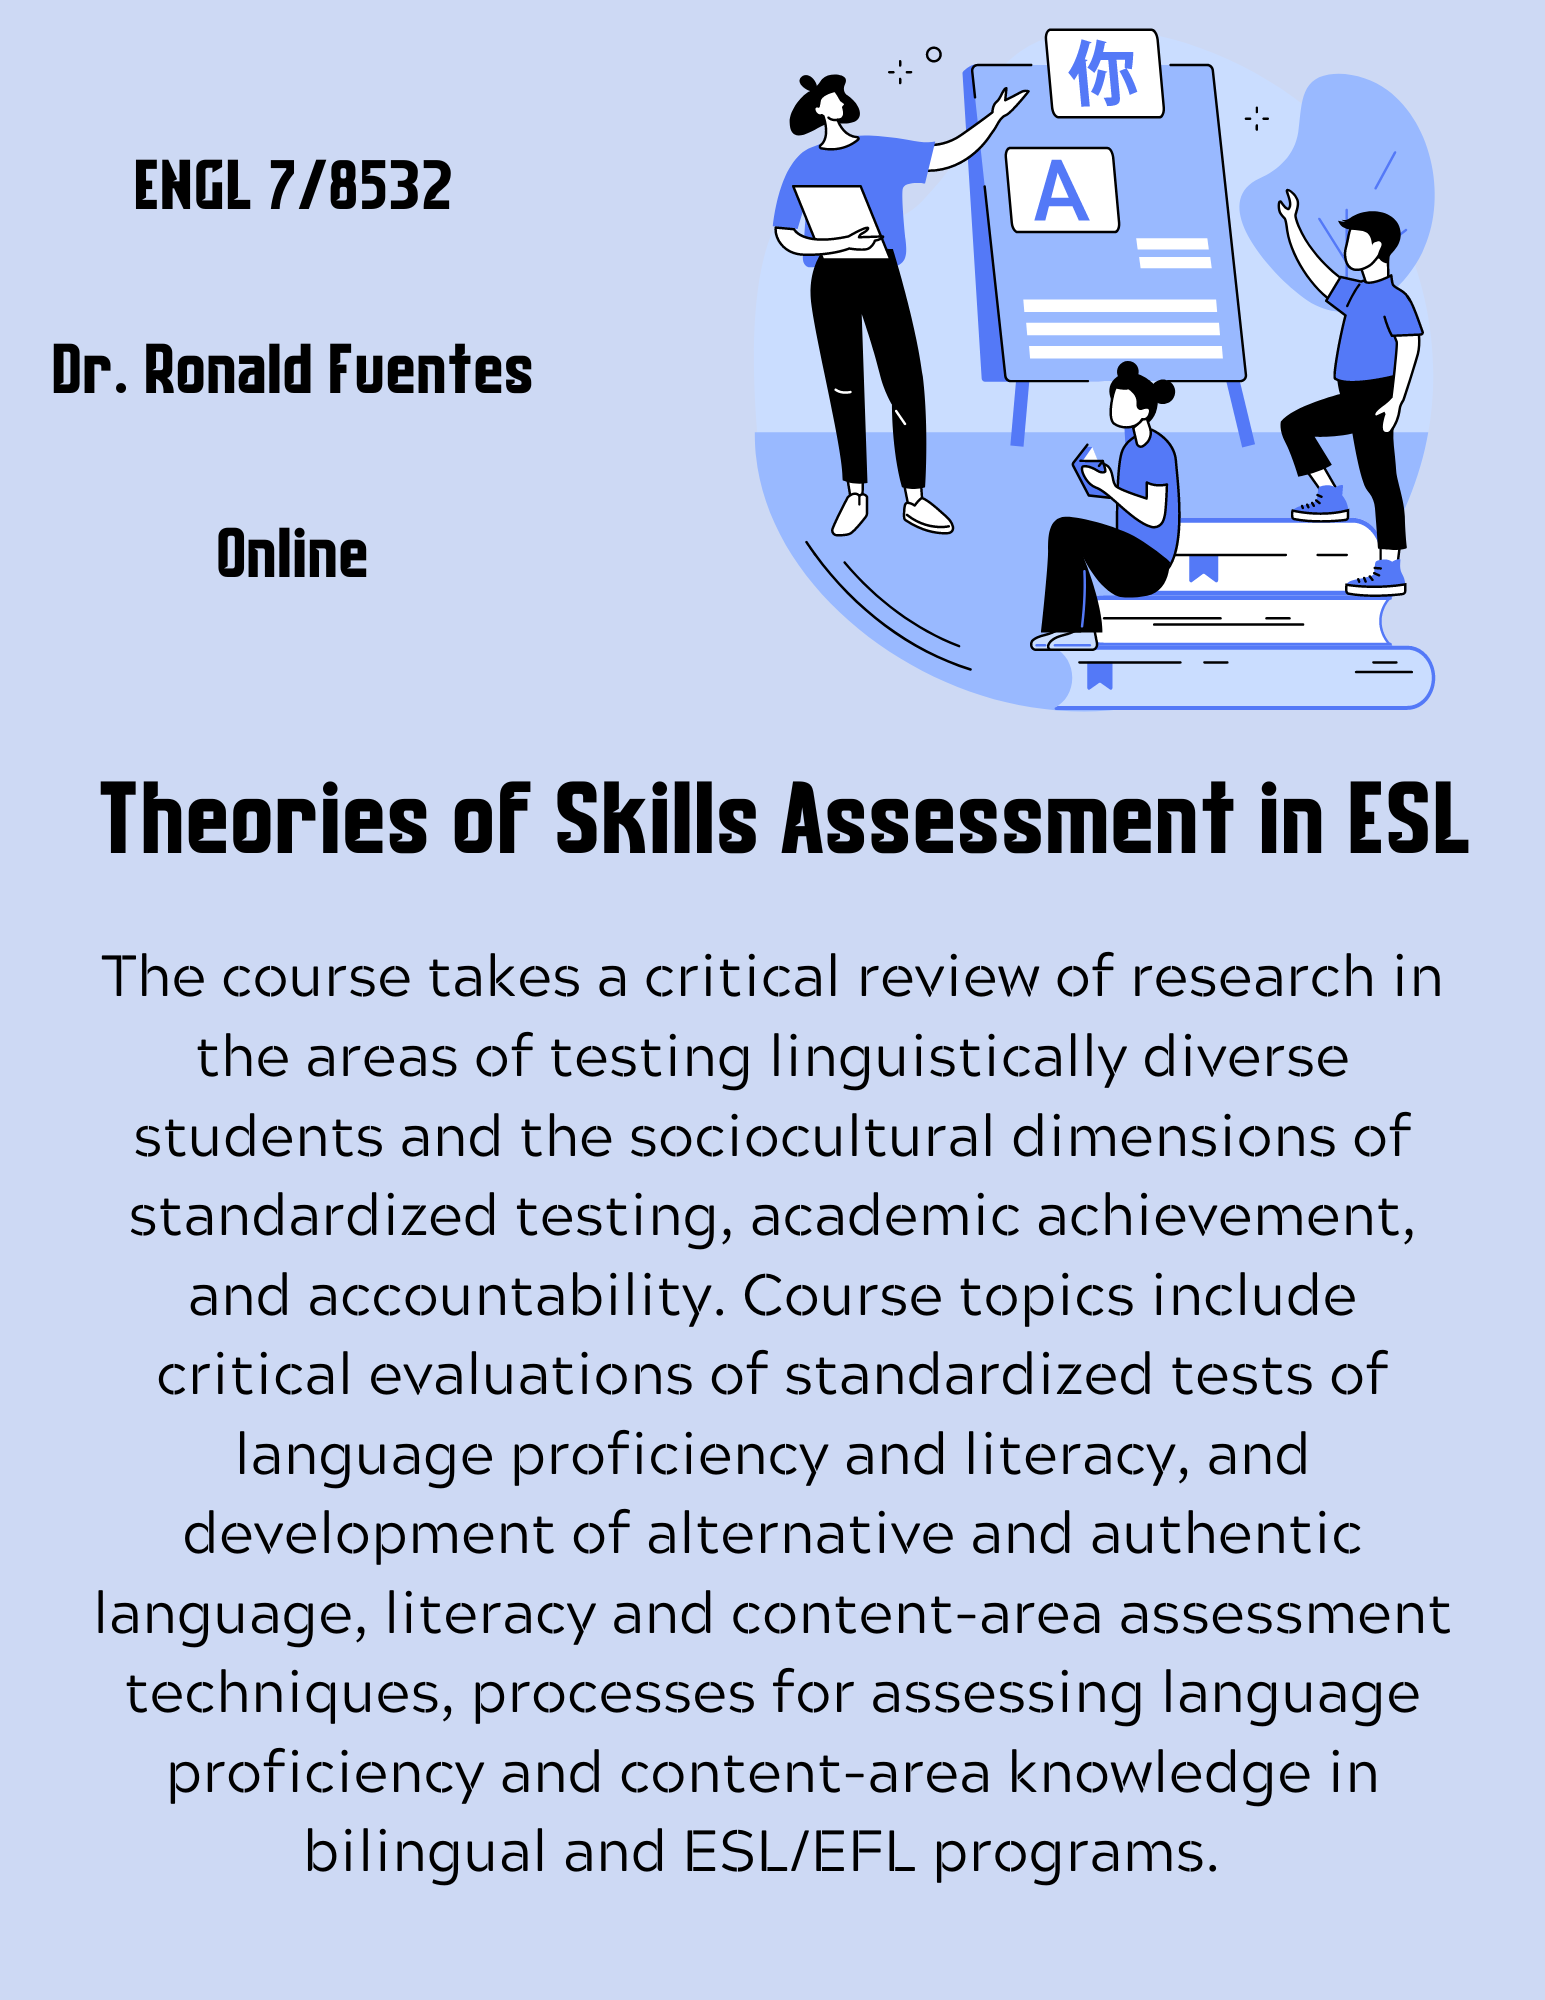 Theories of Skills Assessment in ESL